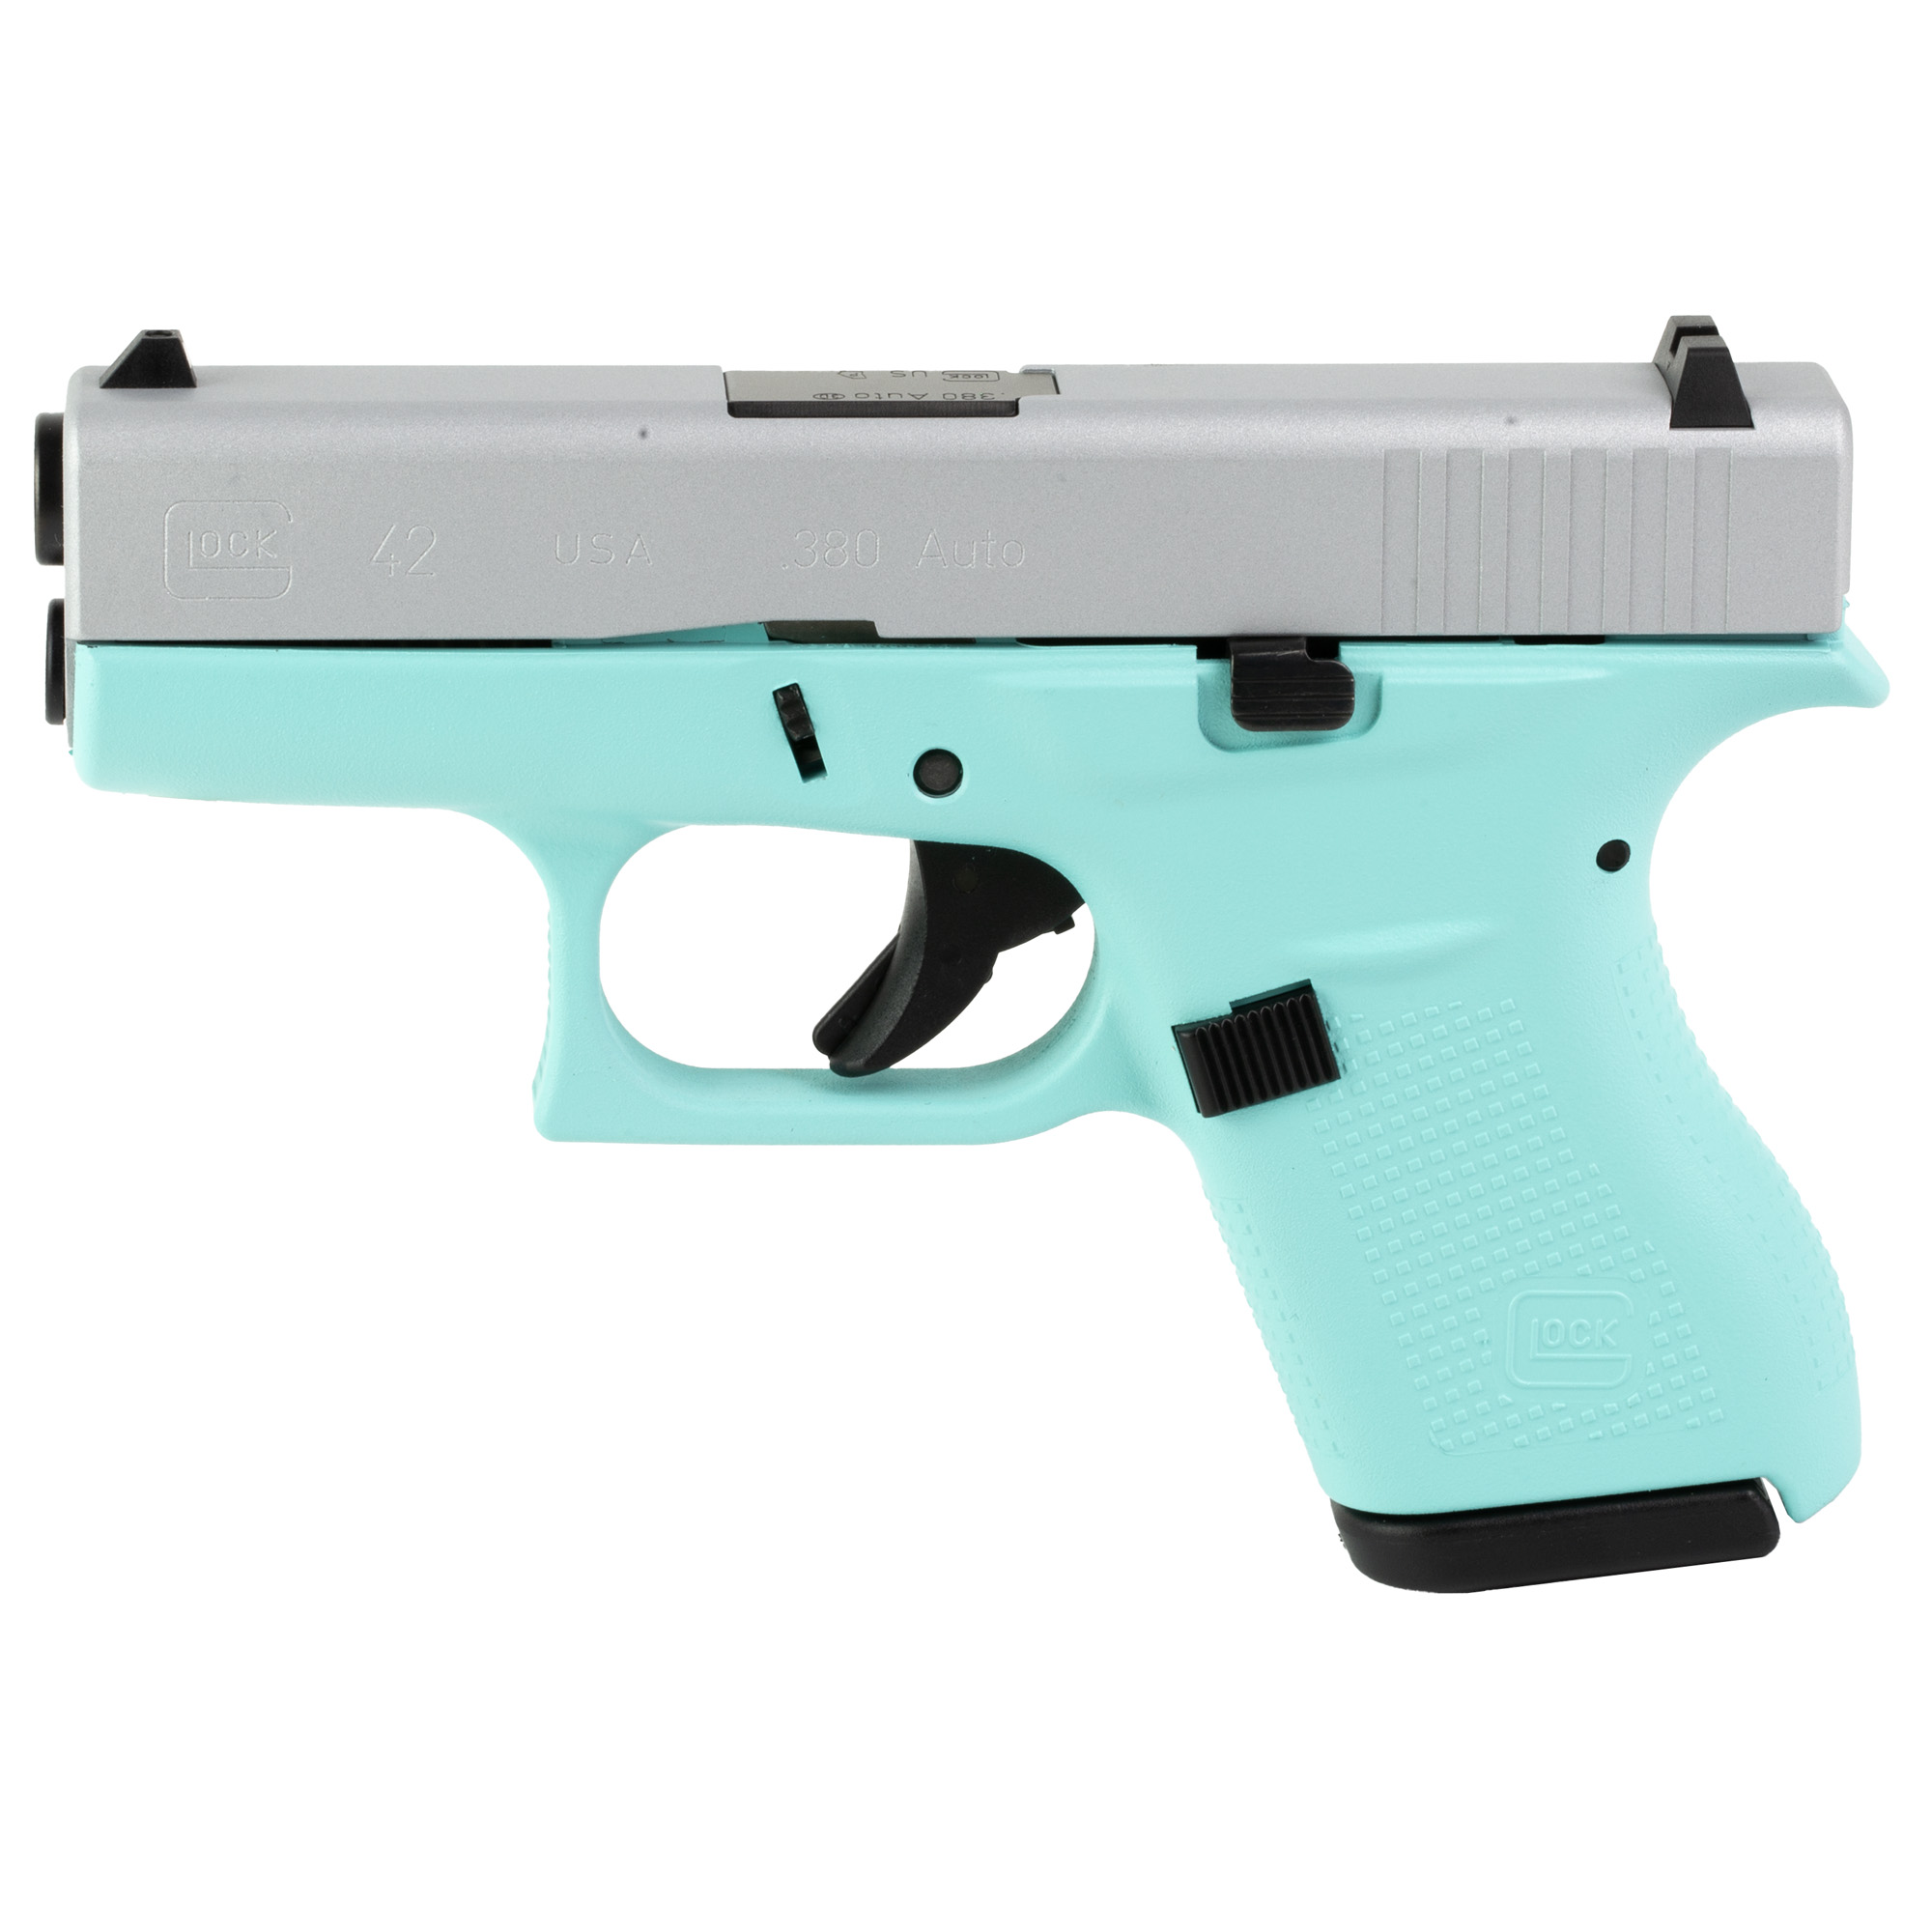 GLOCK 42 Semi-Automatic Pistol .380 ACP 3.25" Barrel 6 Rounds Polymer Frame Cerakote Finish, Robin's Egg Blue with Crushed Si